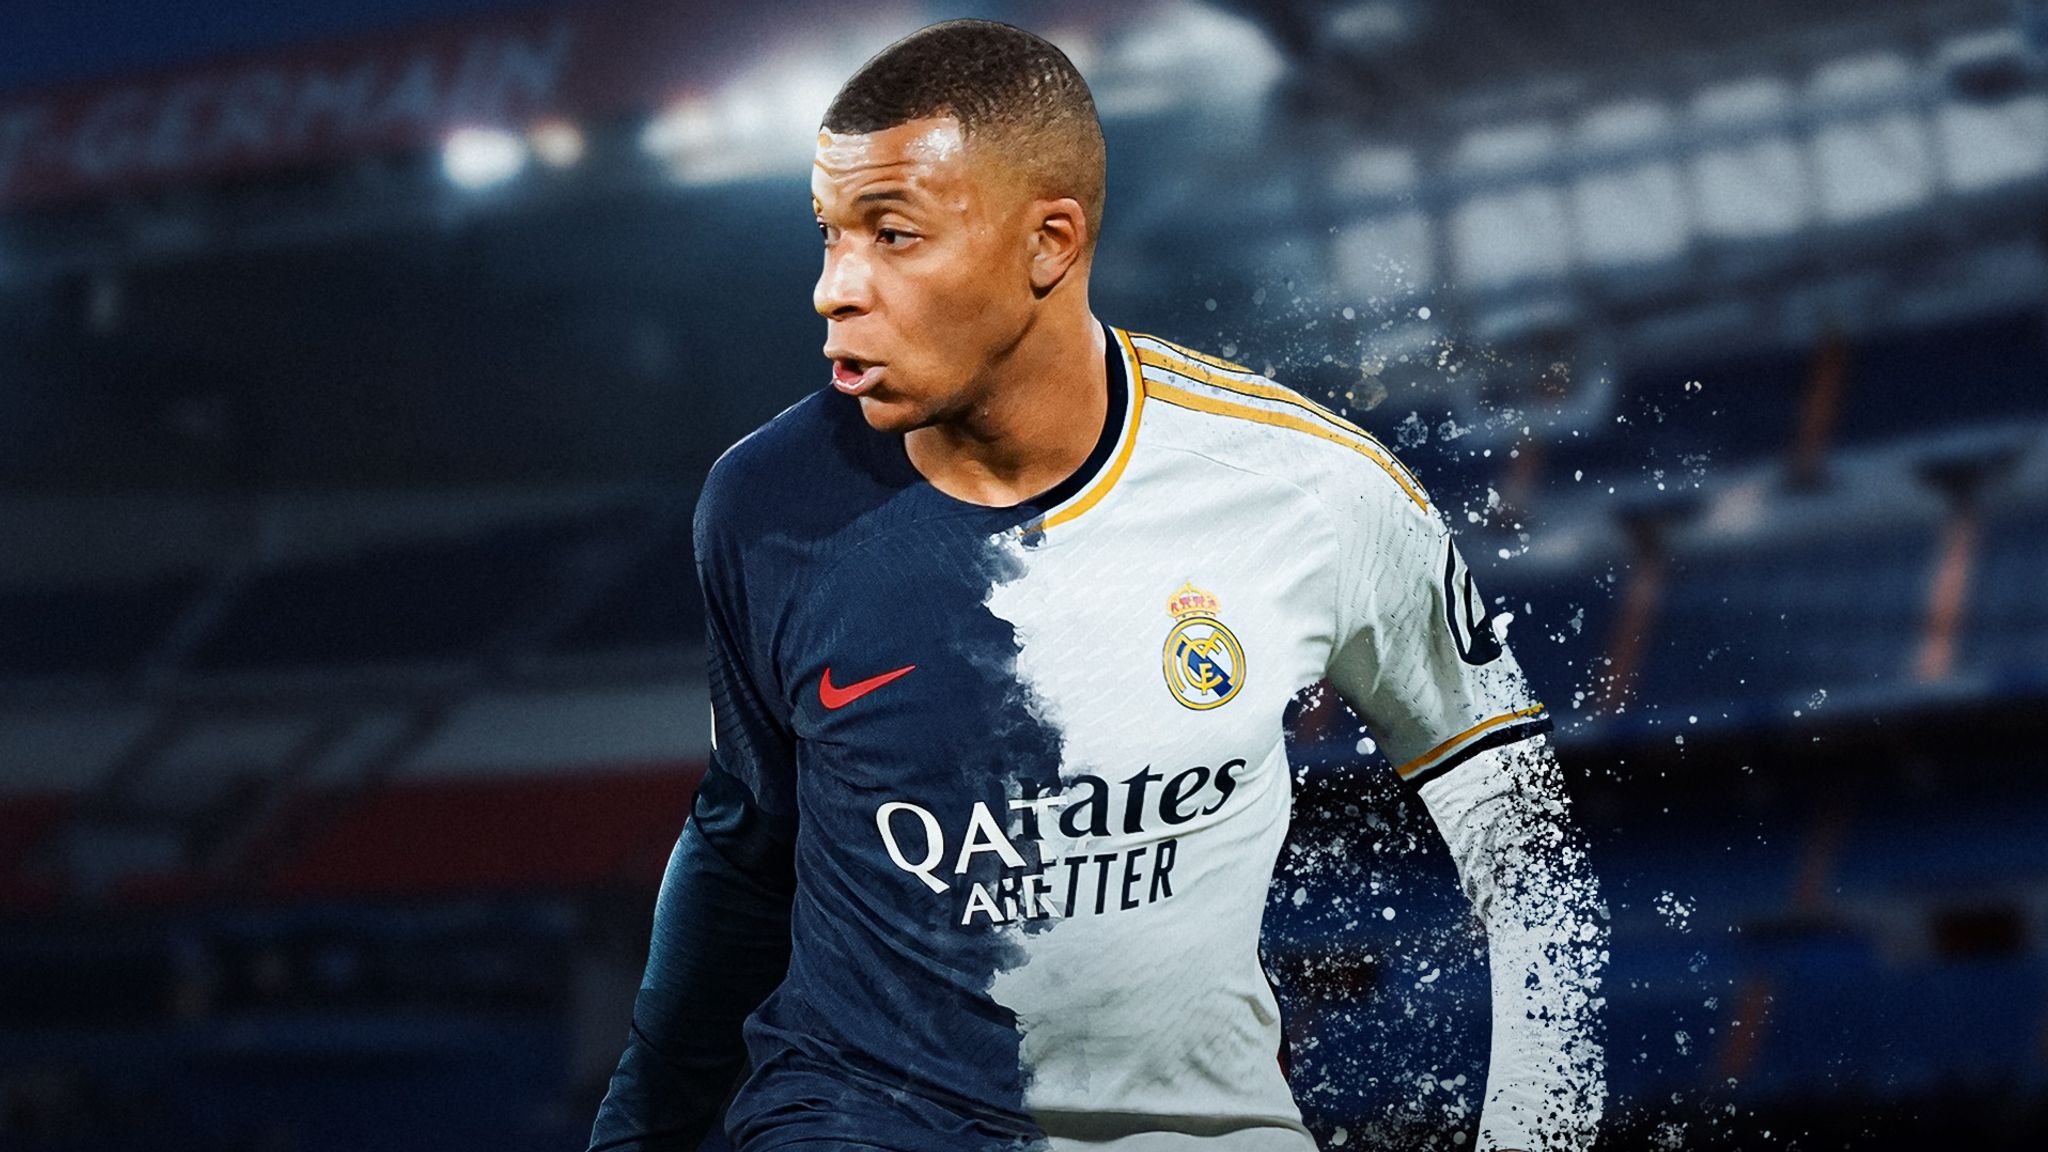 Spanish football journalist Semra Hunter believes Real Madrid could announce the signing of Kylian Mbappe before the Champions League final.